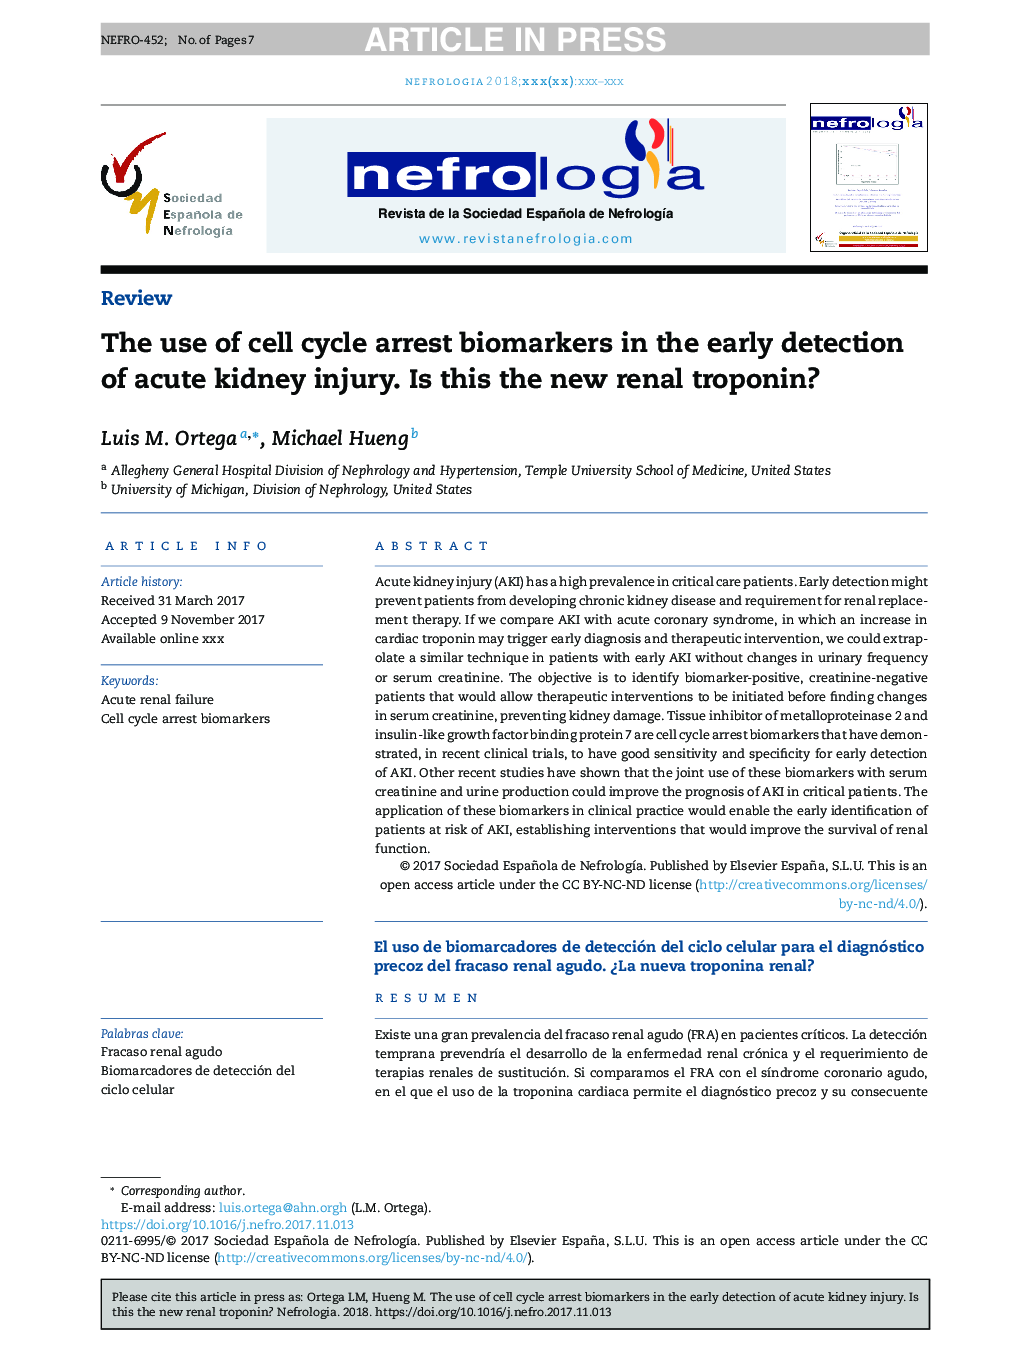 The use of cell cycle arrest biomarkers in the early detection of acute kidney injury. Is this the new renal troponin?